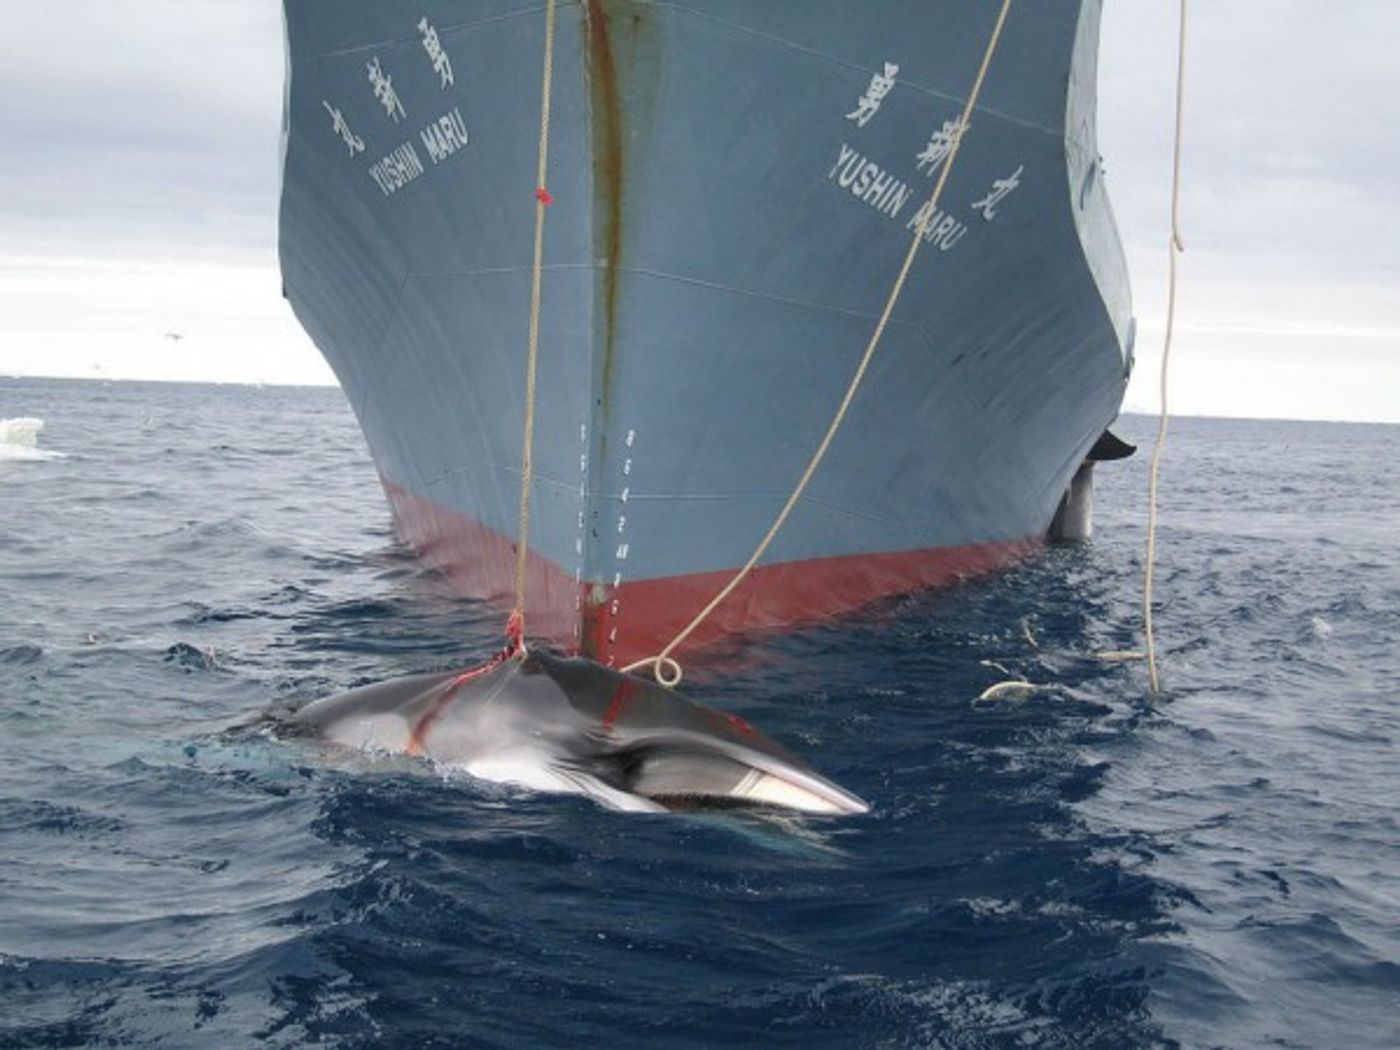 Japan sends fleets out to capture and kill whales on an annual basis, citing "science" as their motive.